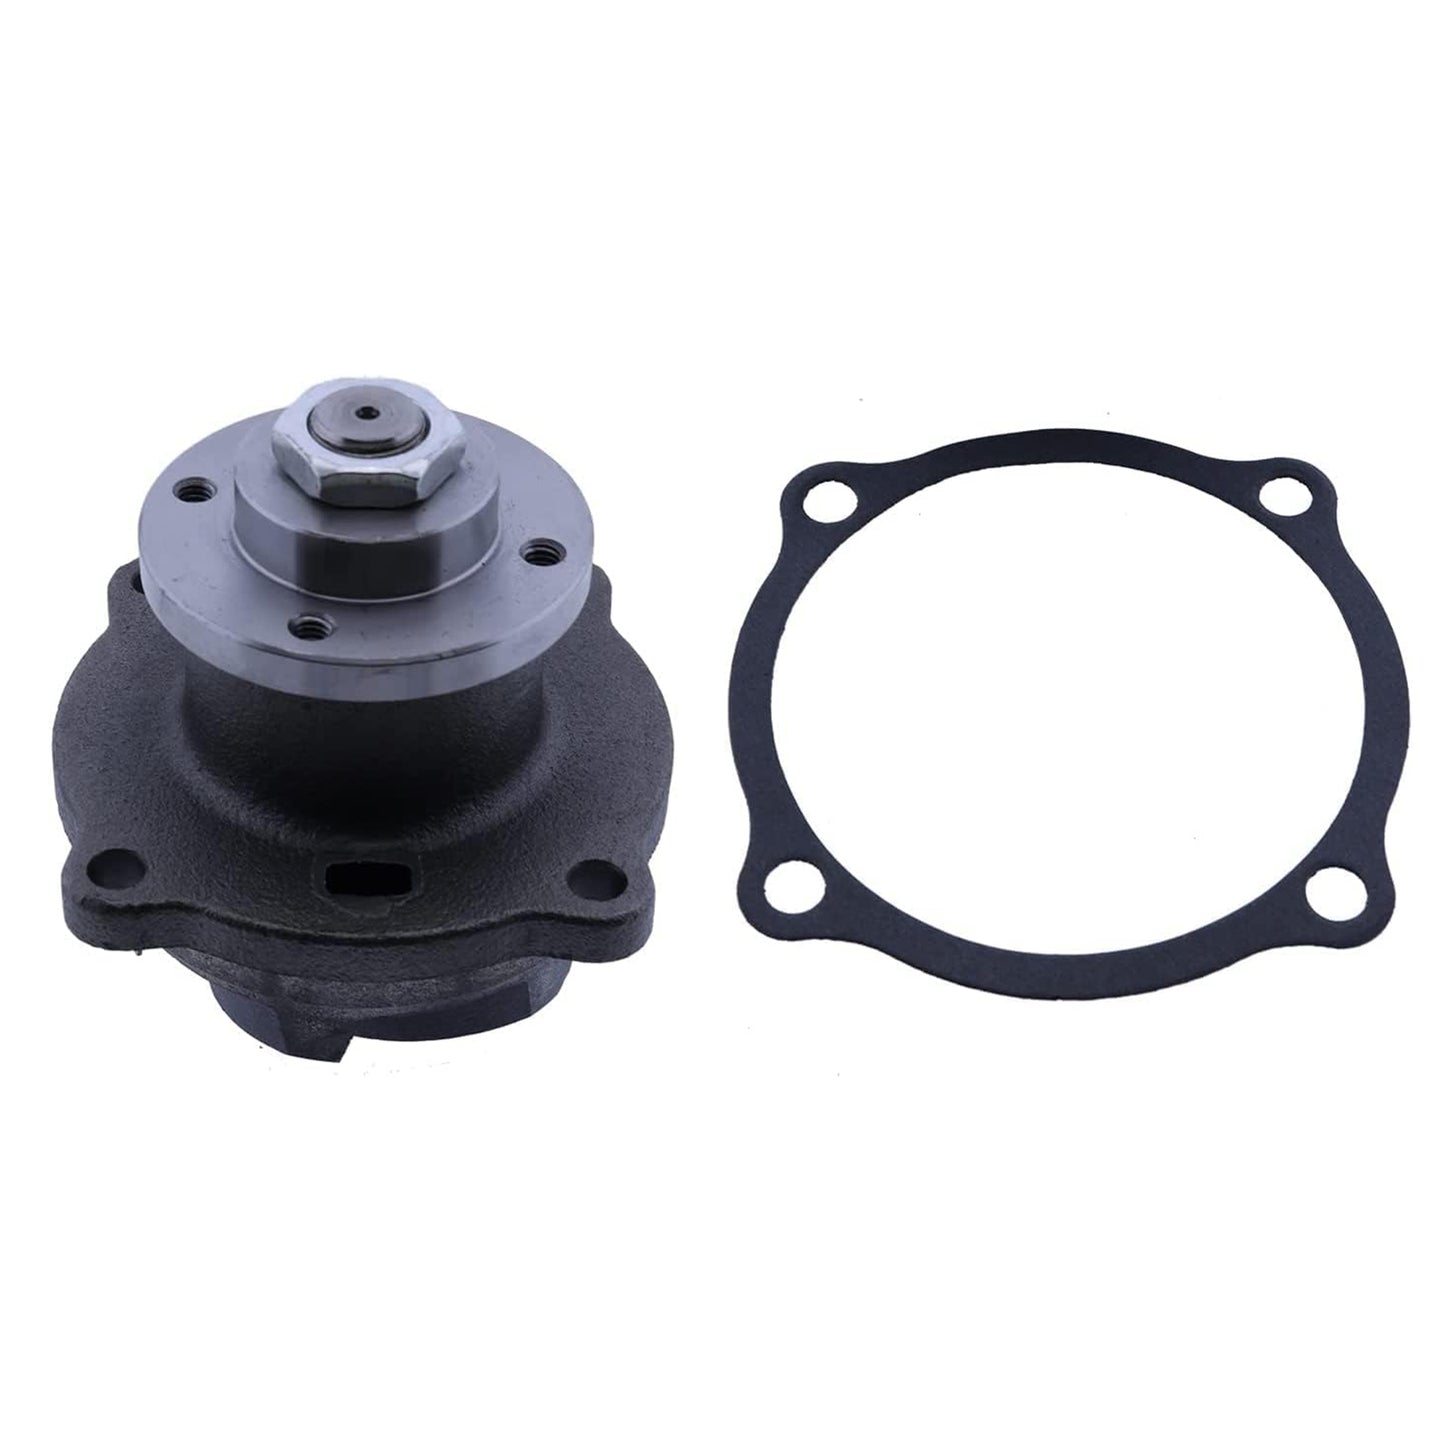 2W1223 Water Pump Compatible with Caterpillar 3204 Engine Loader 910 916 926 931 935